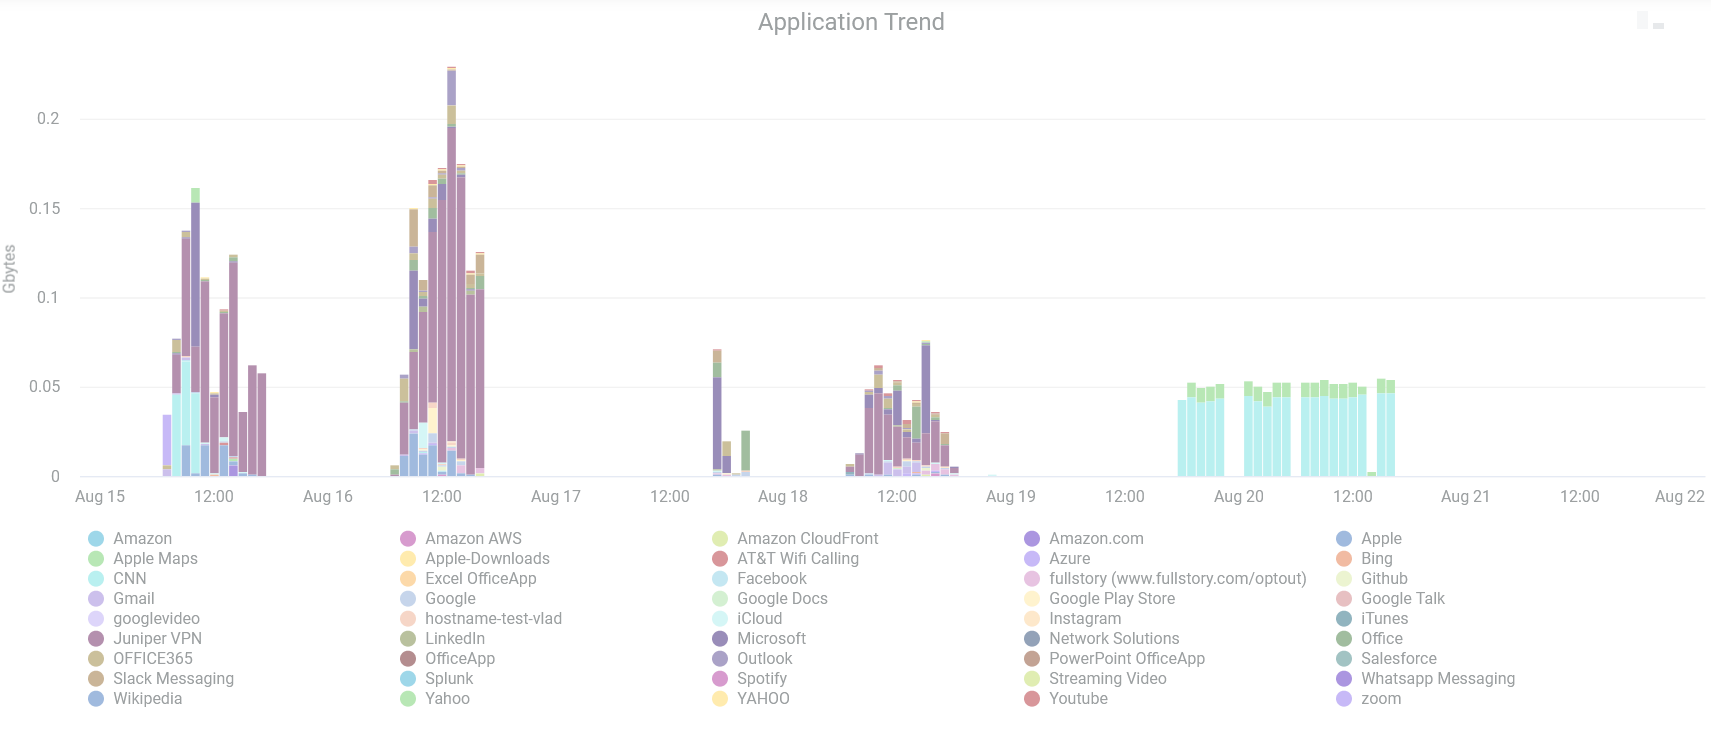 Application Trends in Wireless Client Sessions